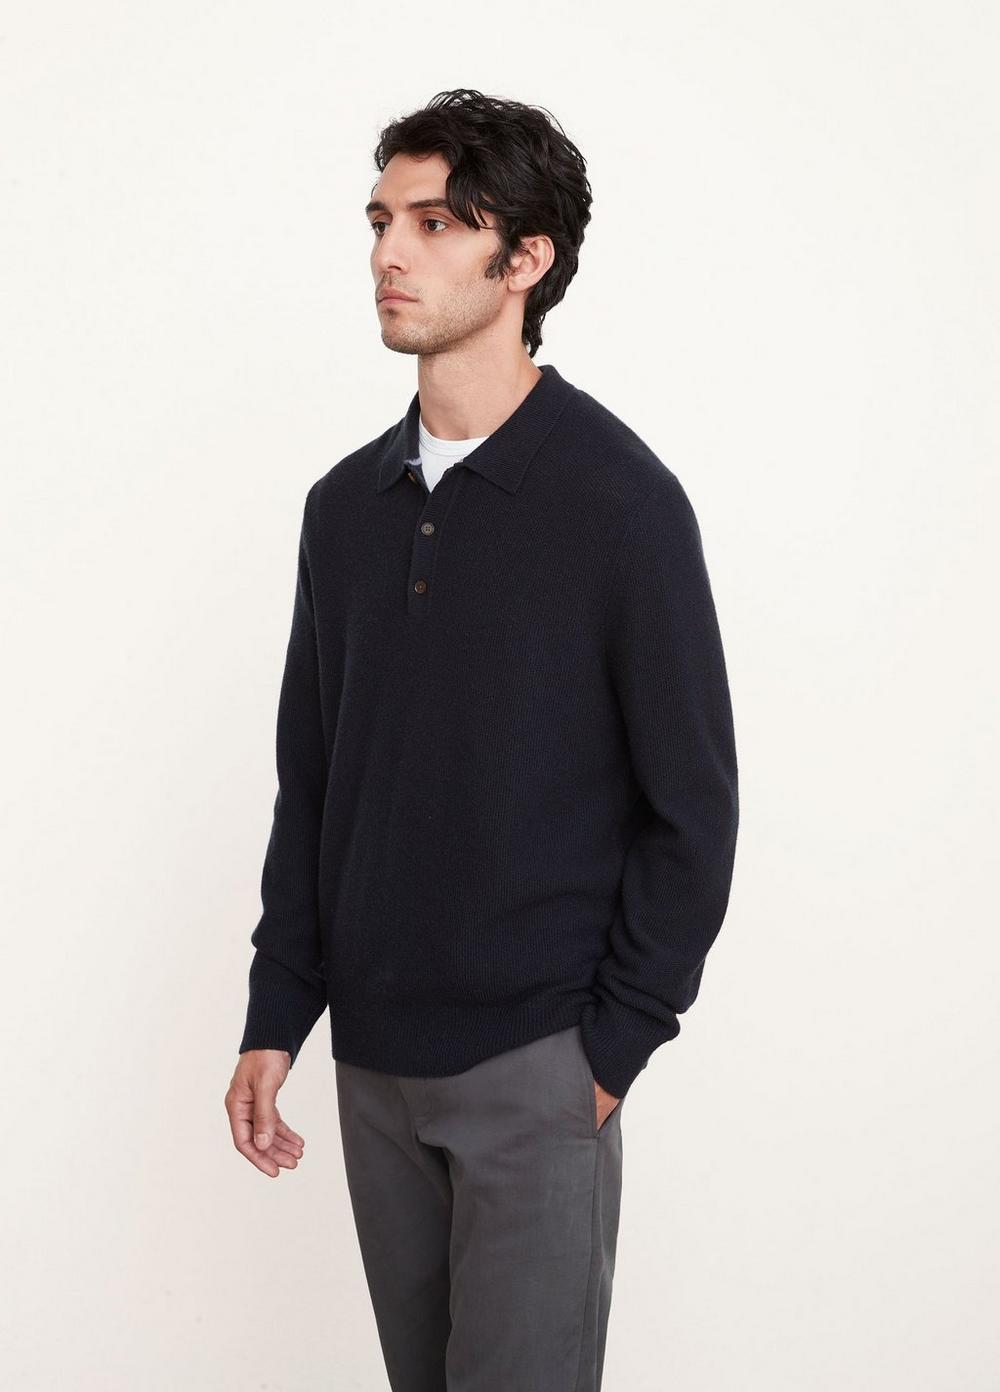 Seed Stitch Polo in Vince Sold Out Products | Vince